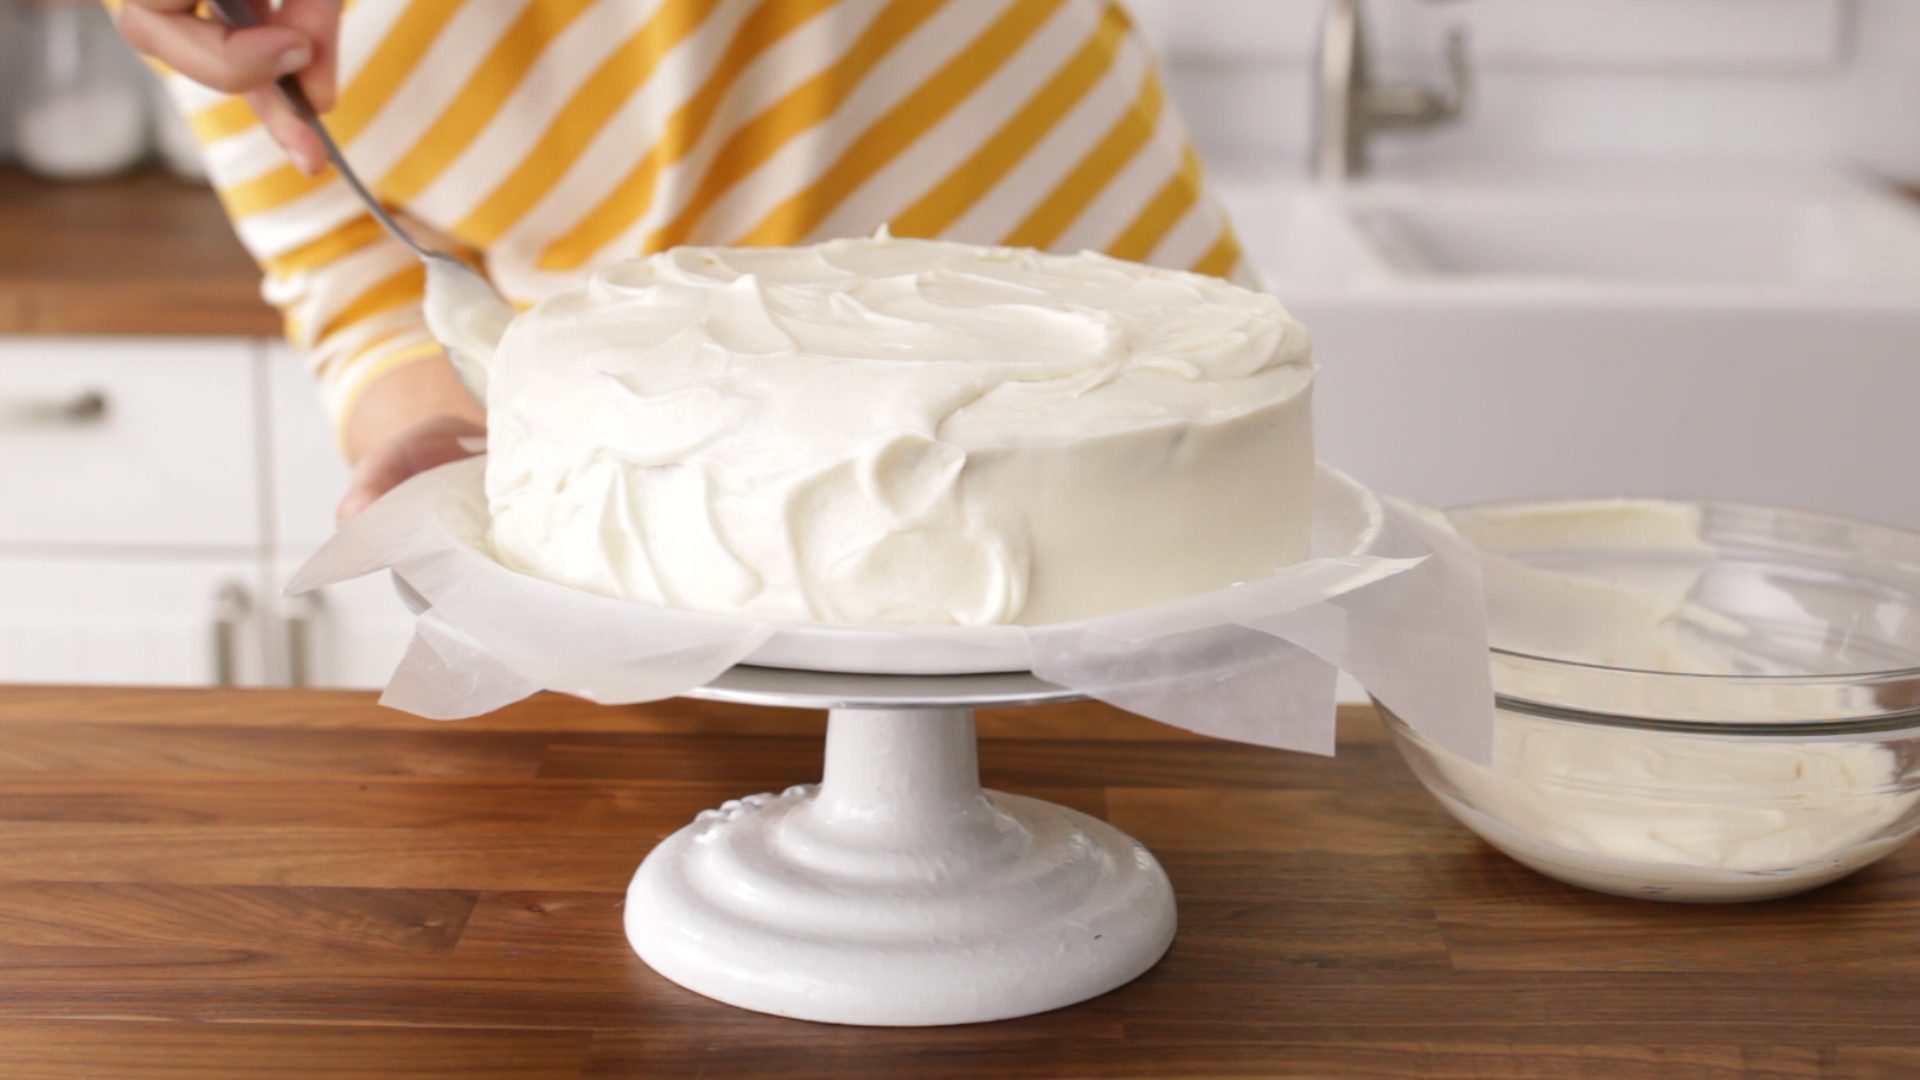 How to spread the coating on the cake